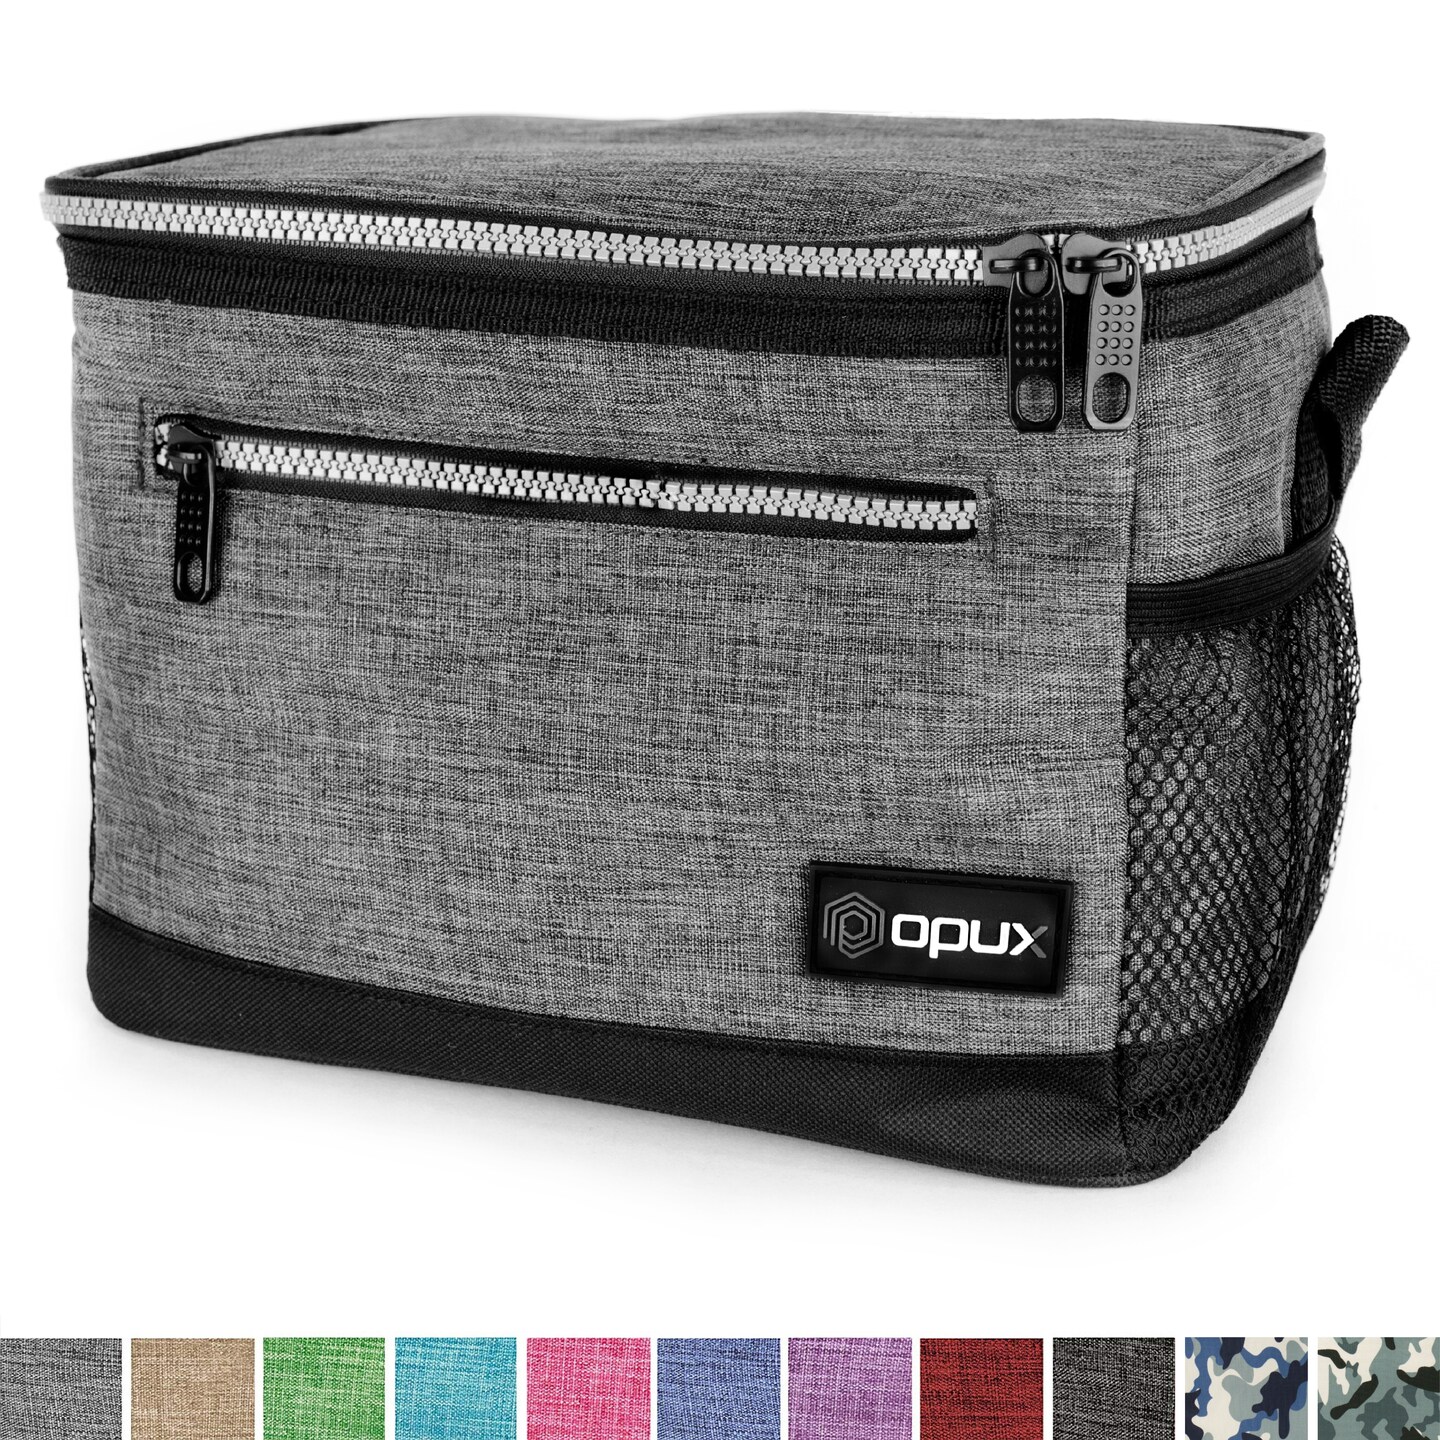 OPUX Large Insulated Lunch Bag for Men Women, Leakproof Thermal